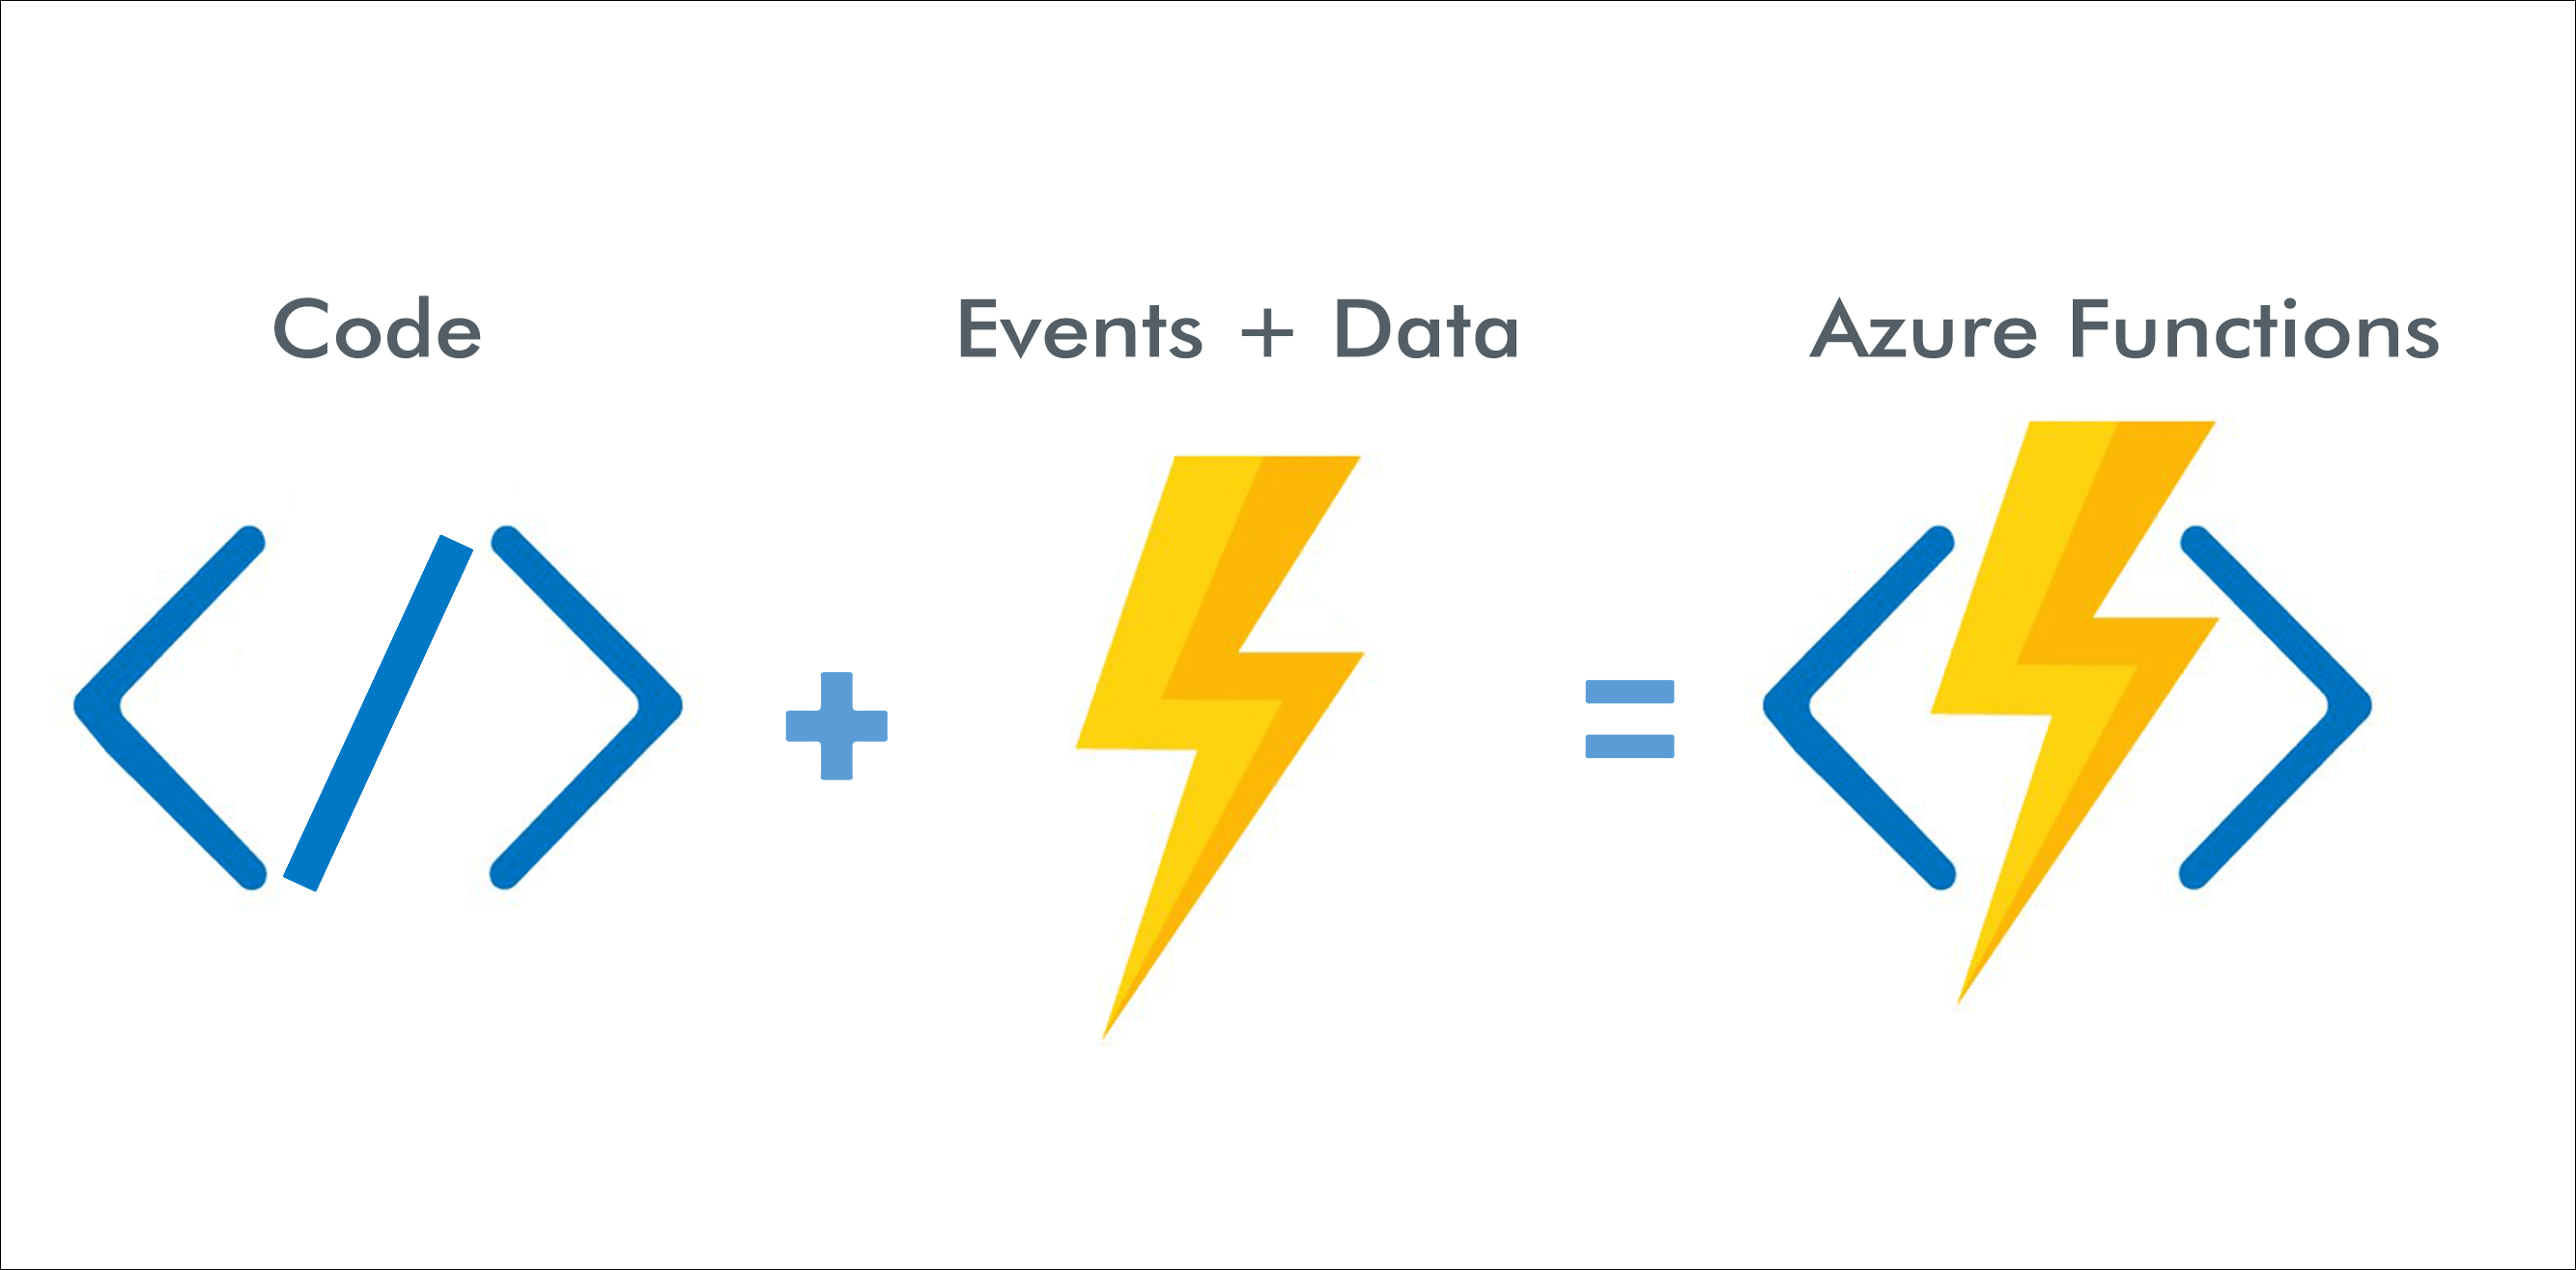 Code plus Events and Data Equals Azure Functions